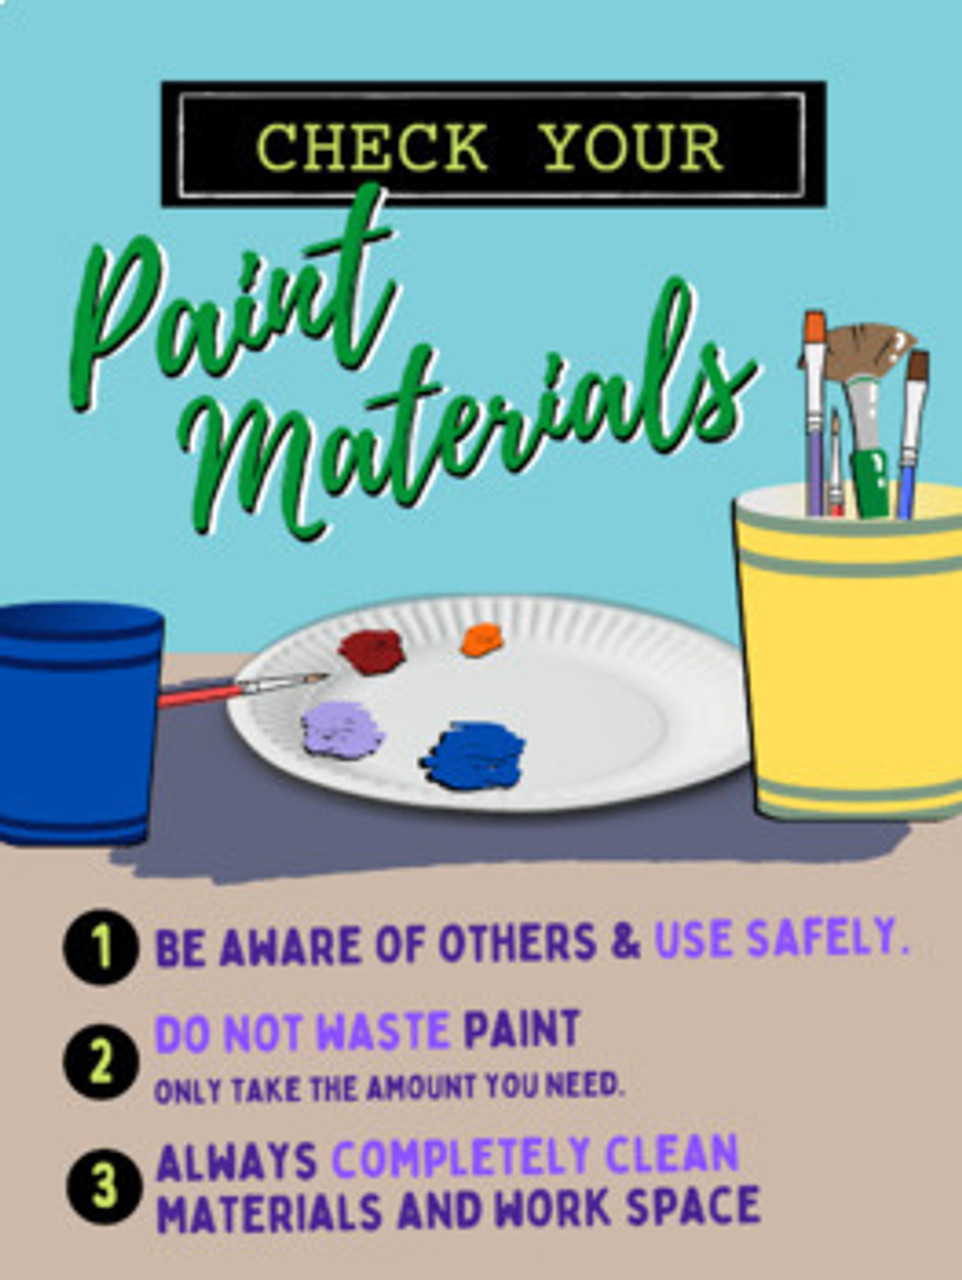 POSTERS: Material Safety Use & Clean Up Reminders (Bundle)